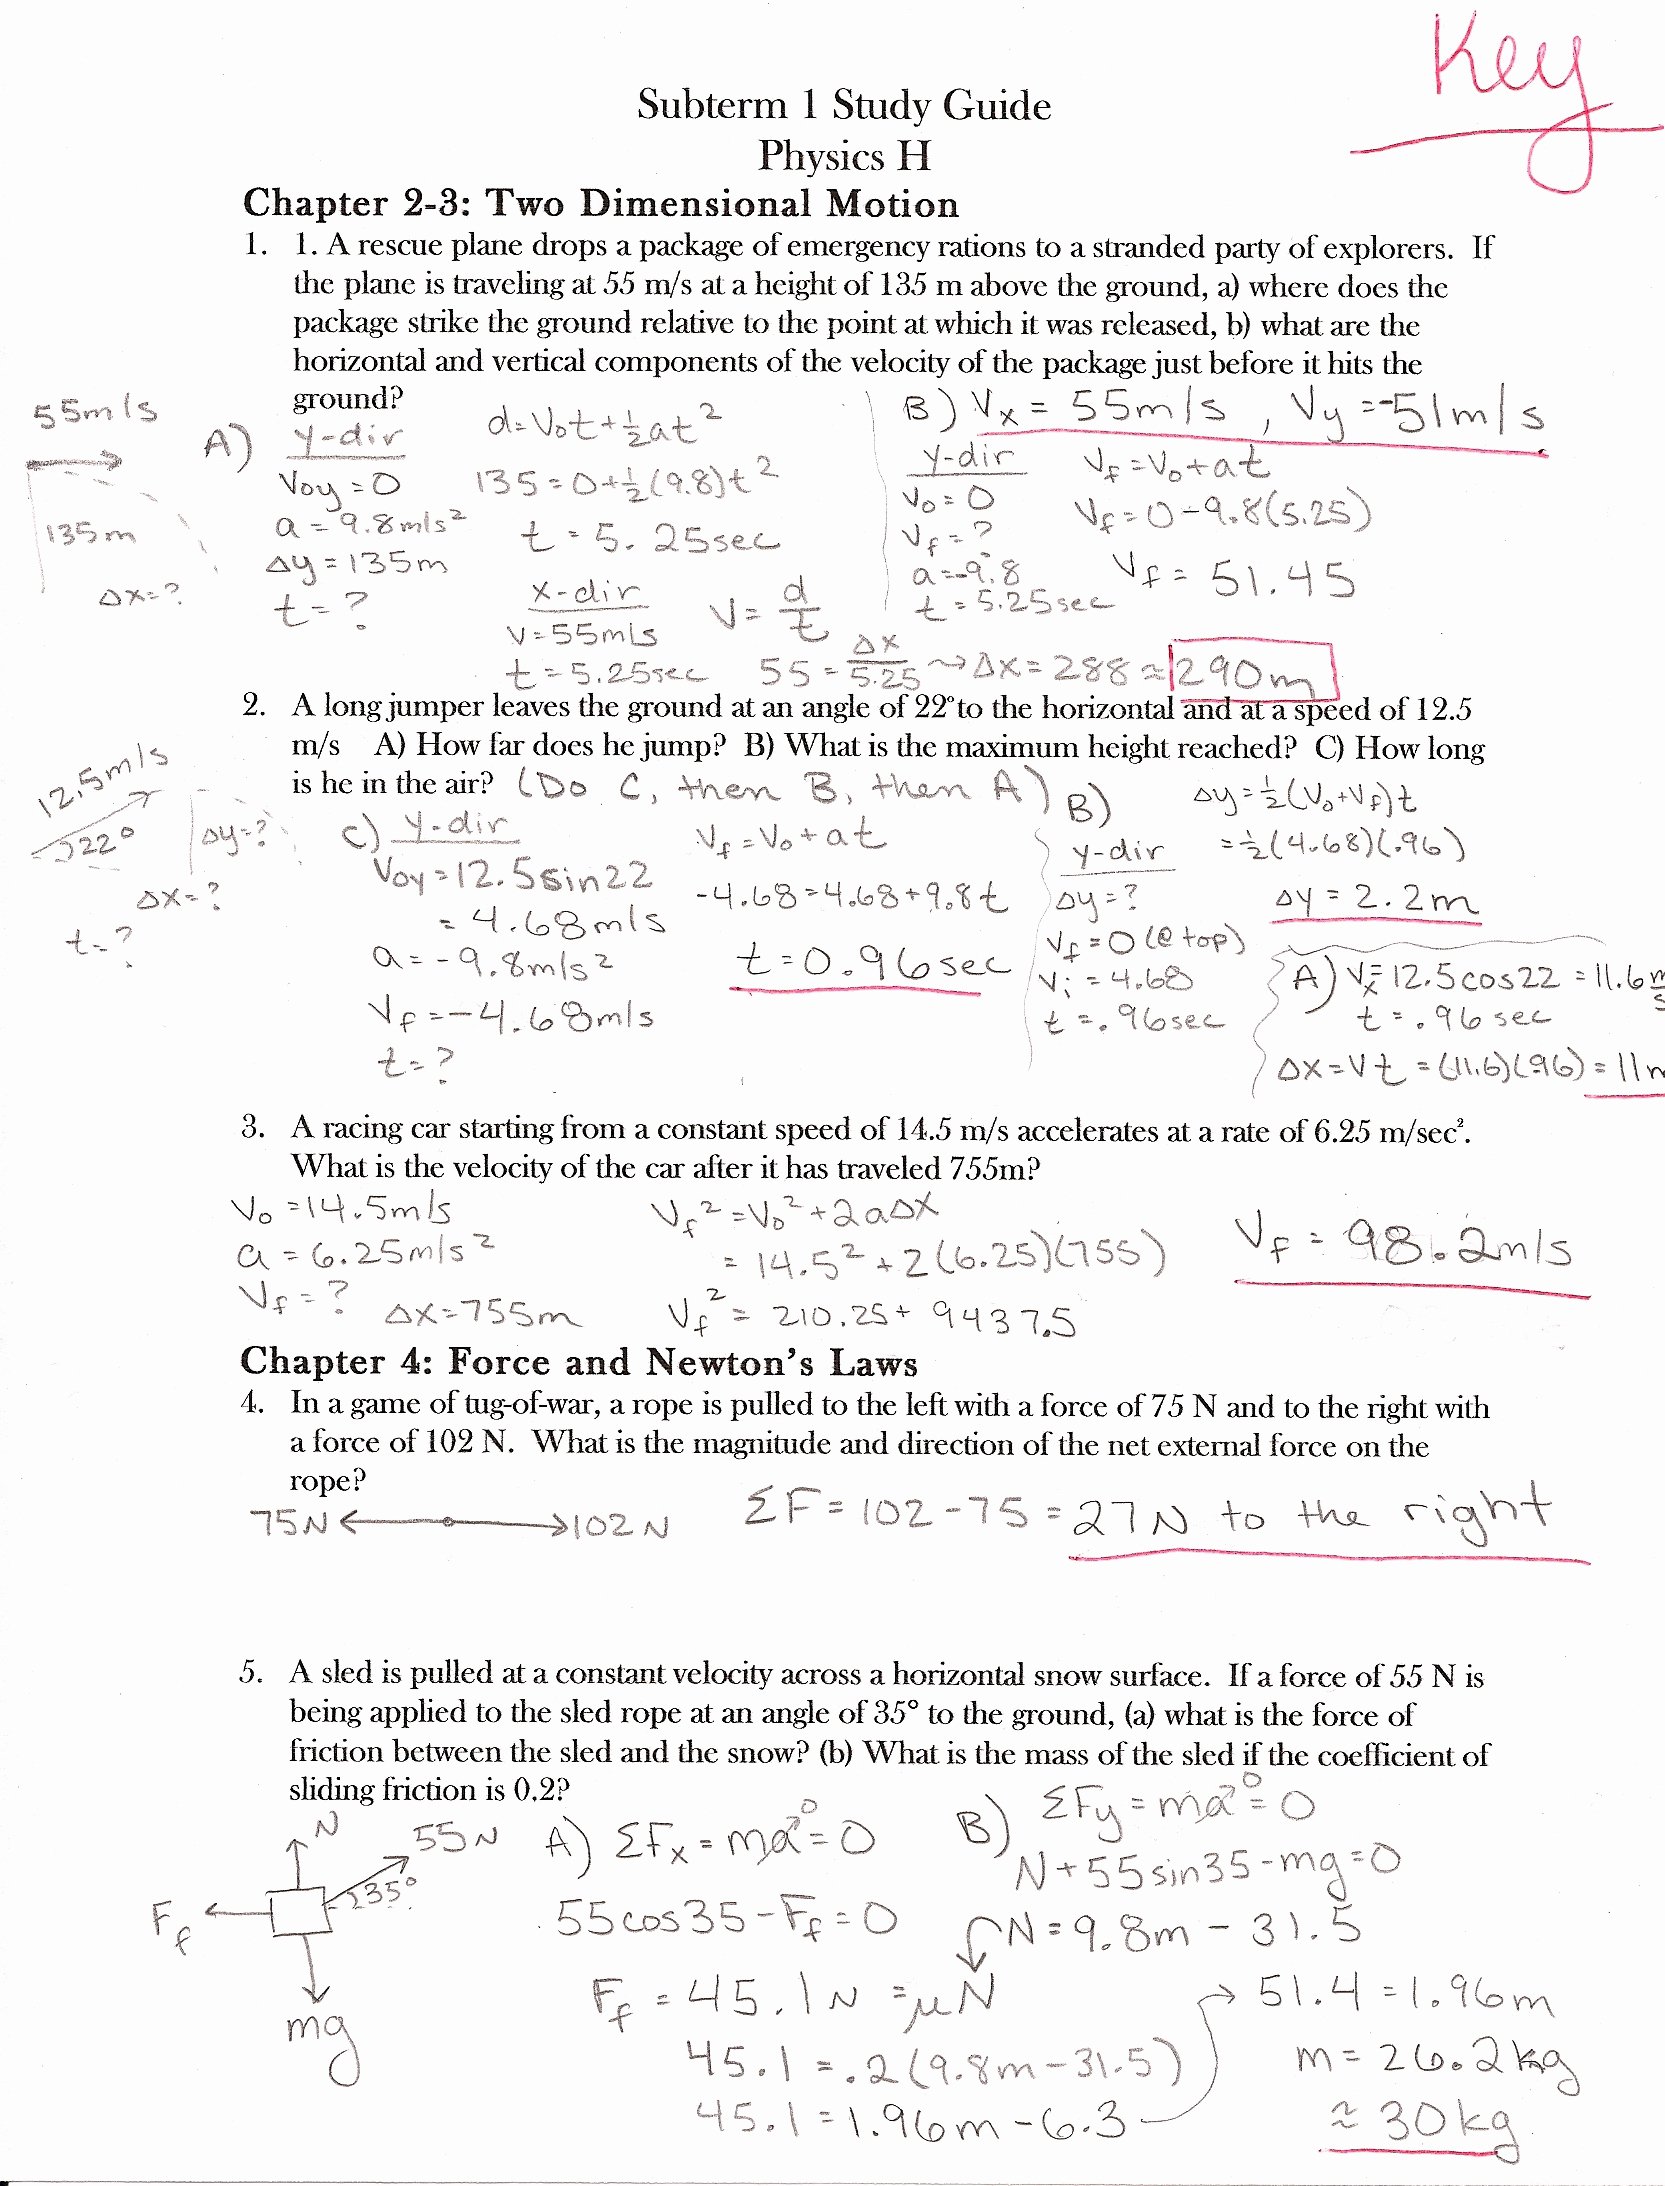 Electrical Power Worksheet Answers Fresh Webassign Answers Physics Key Foundation for Critical